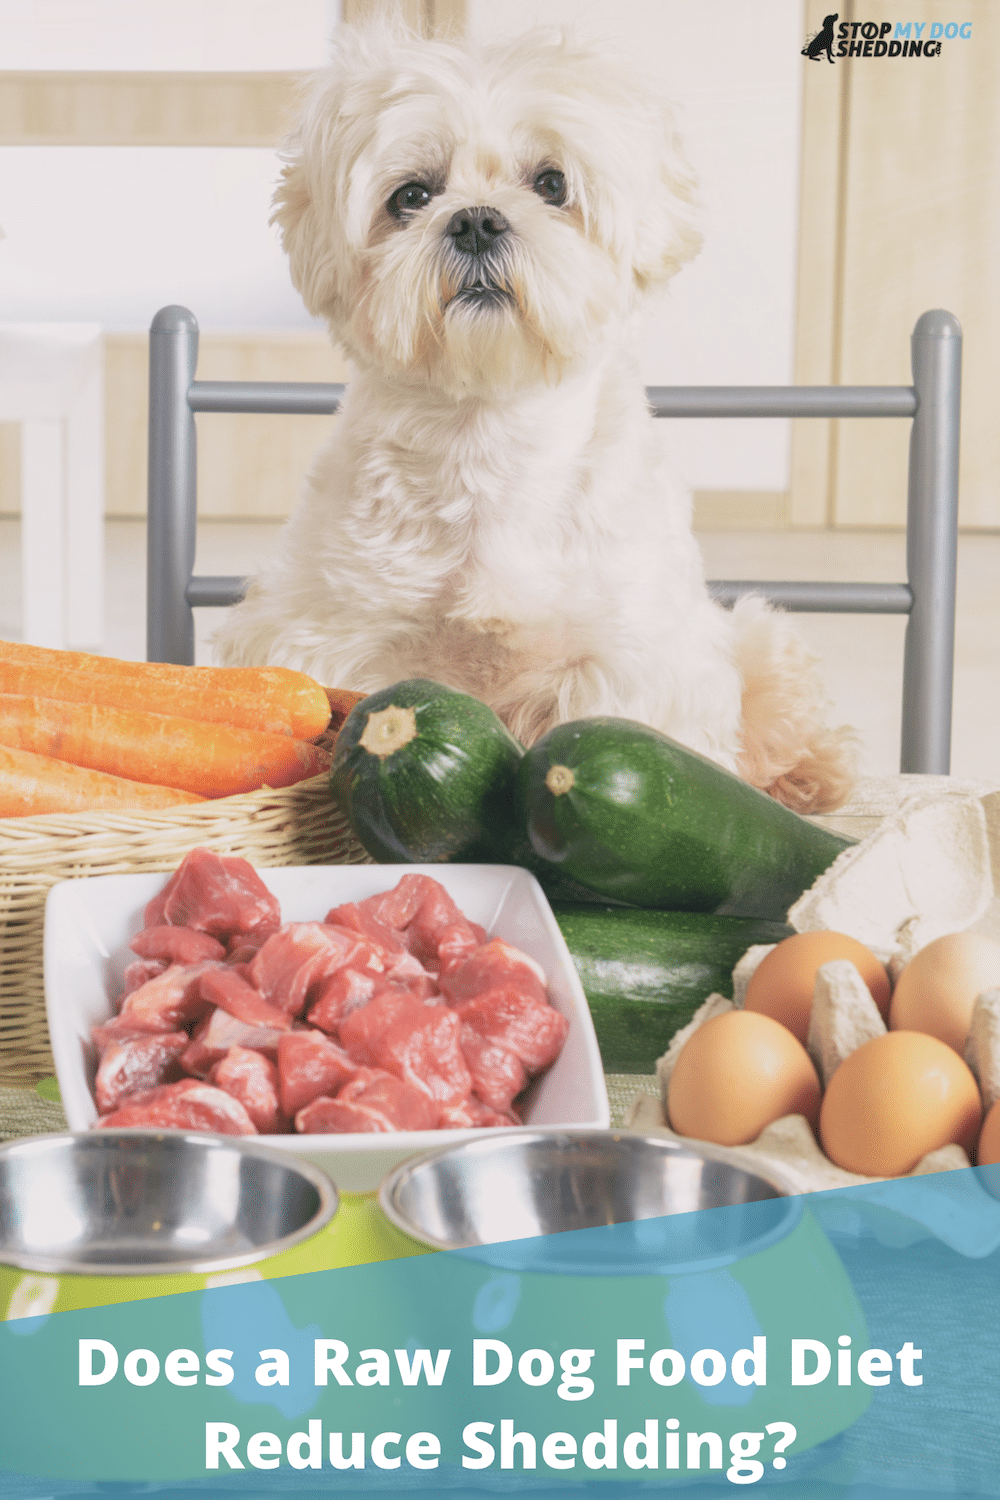 Does a Raw Diet Reduce Dog Shedding?